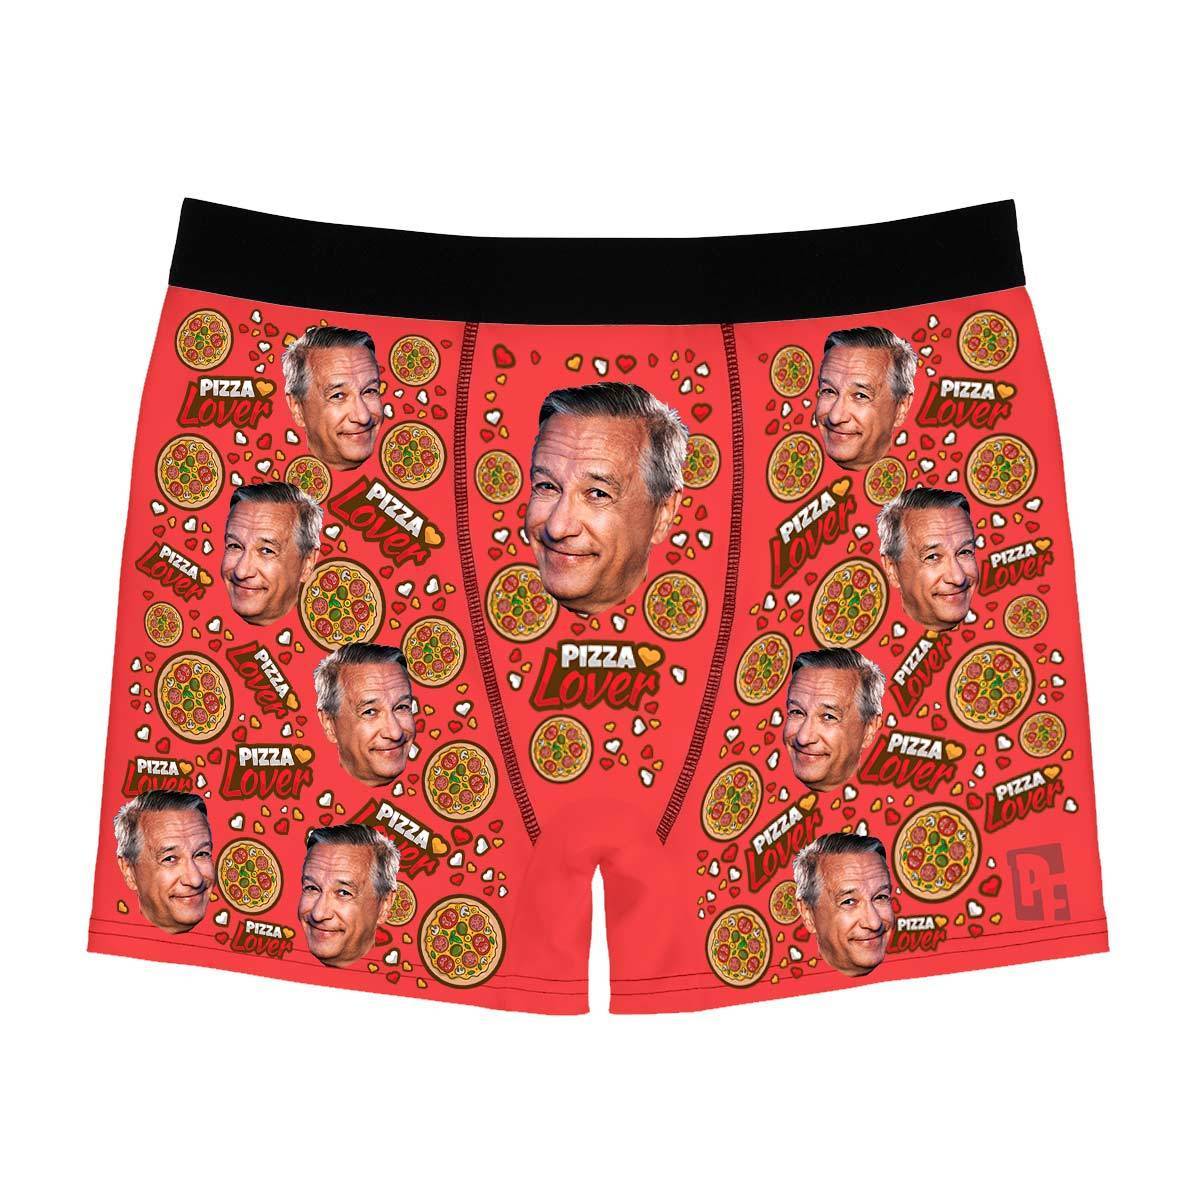 Red Pizza Lover men's boxer briefs personalized with photo printed on them